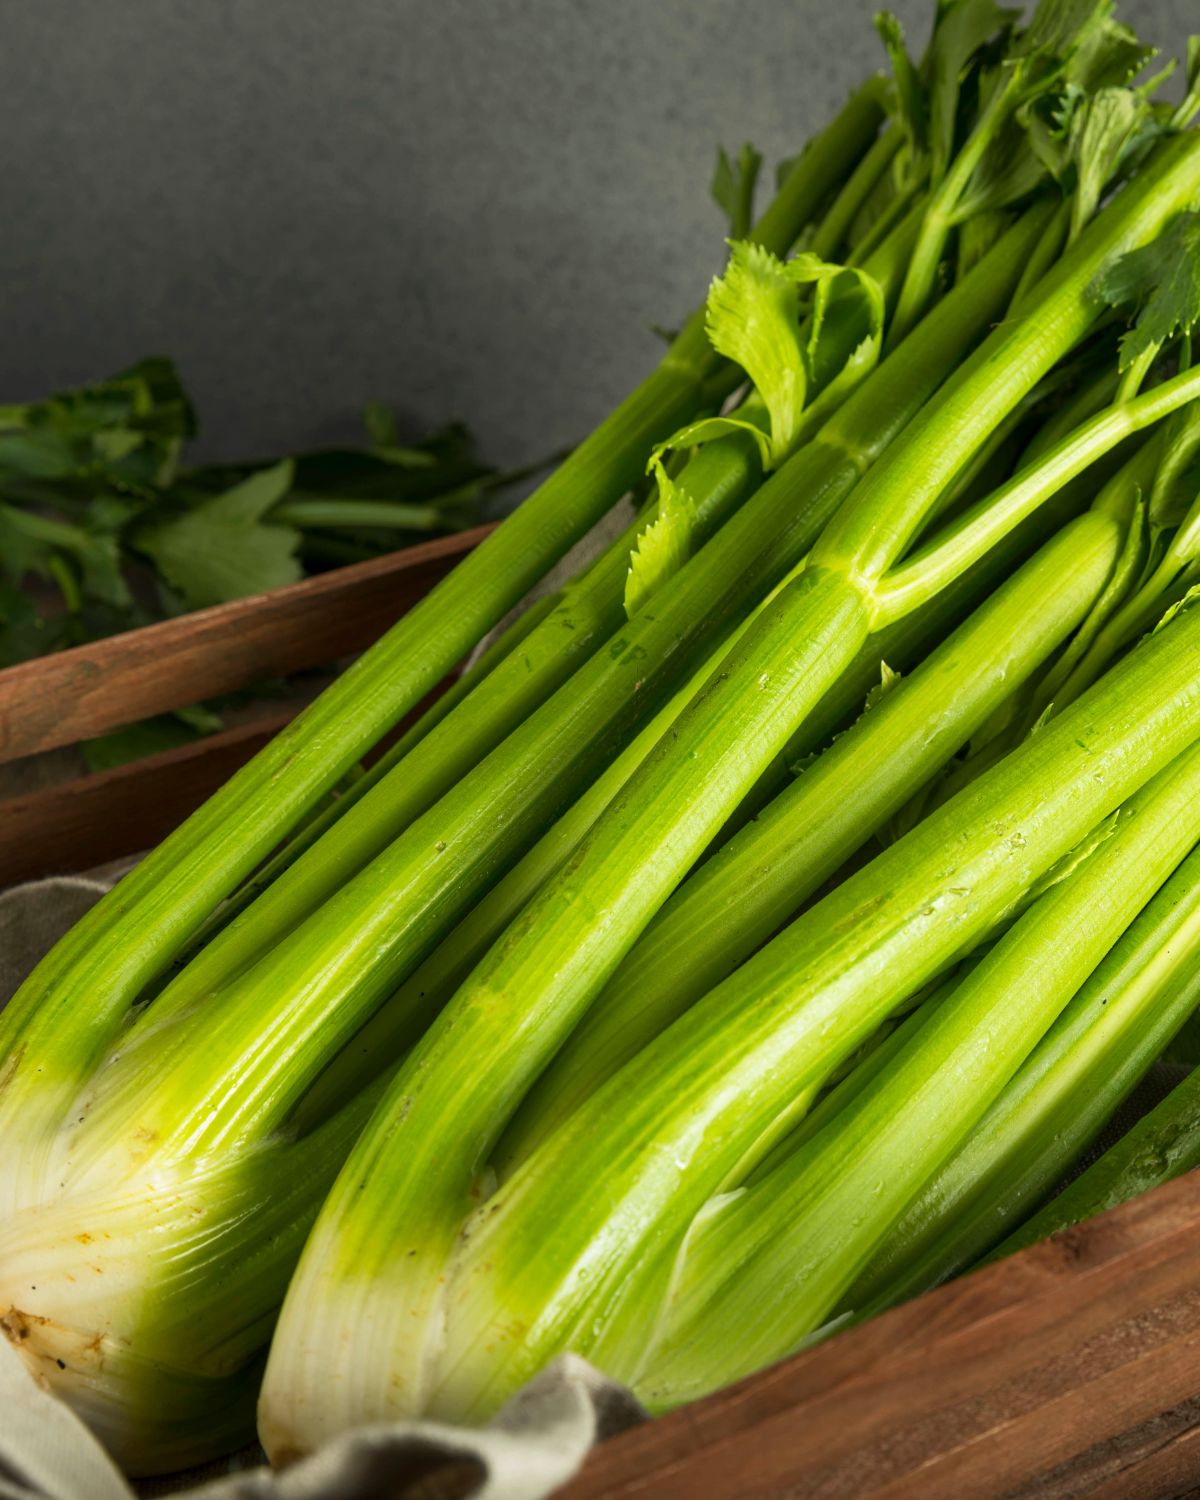 Celery stalks in a wooden crate.